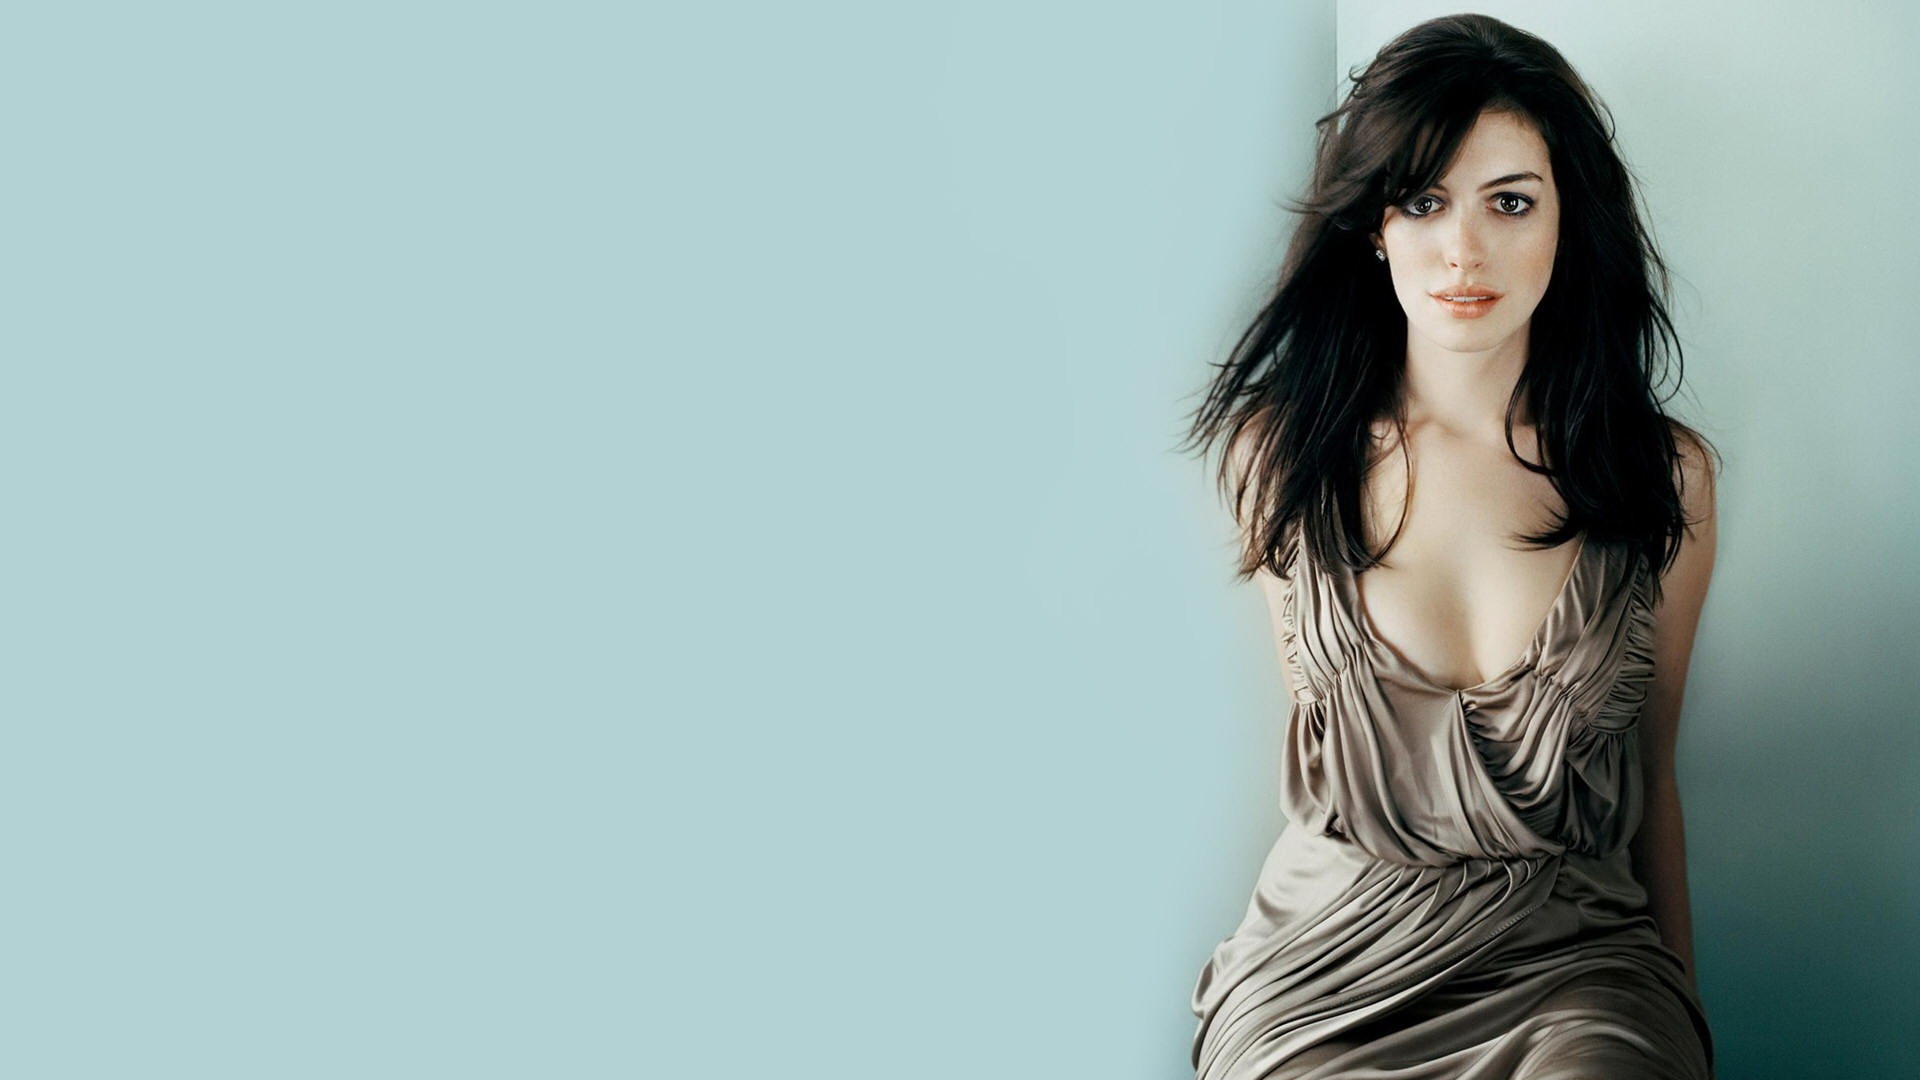 Anne Hathaway #013 - 1920x1080 Wallpapers Pictures Photos Images